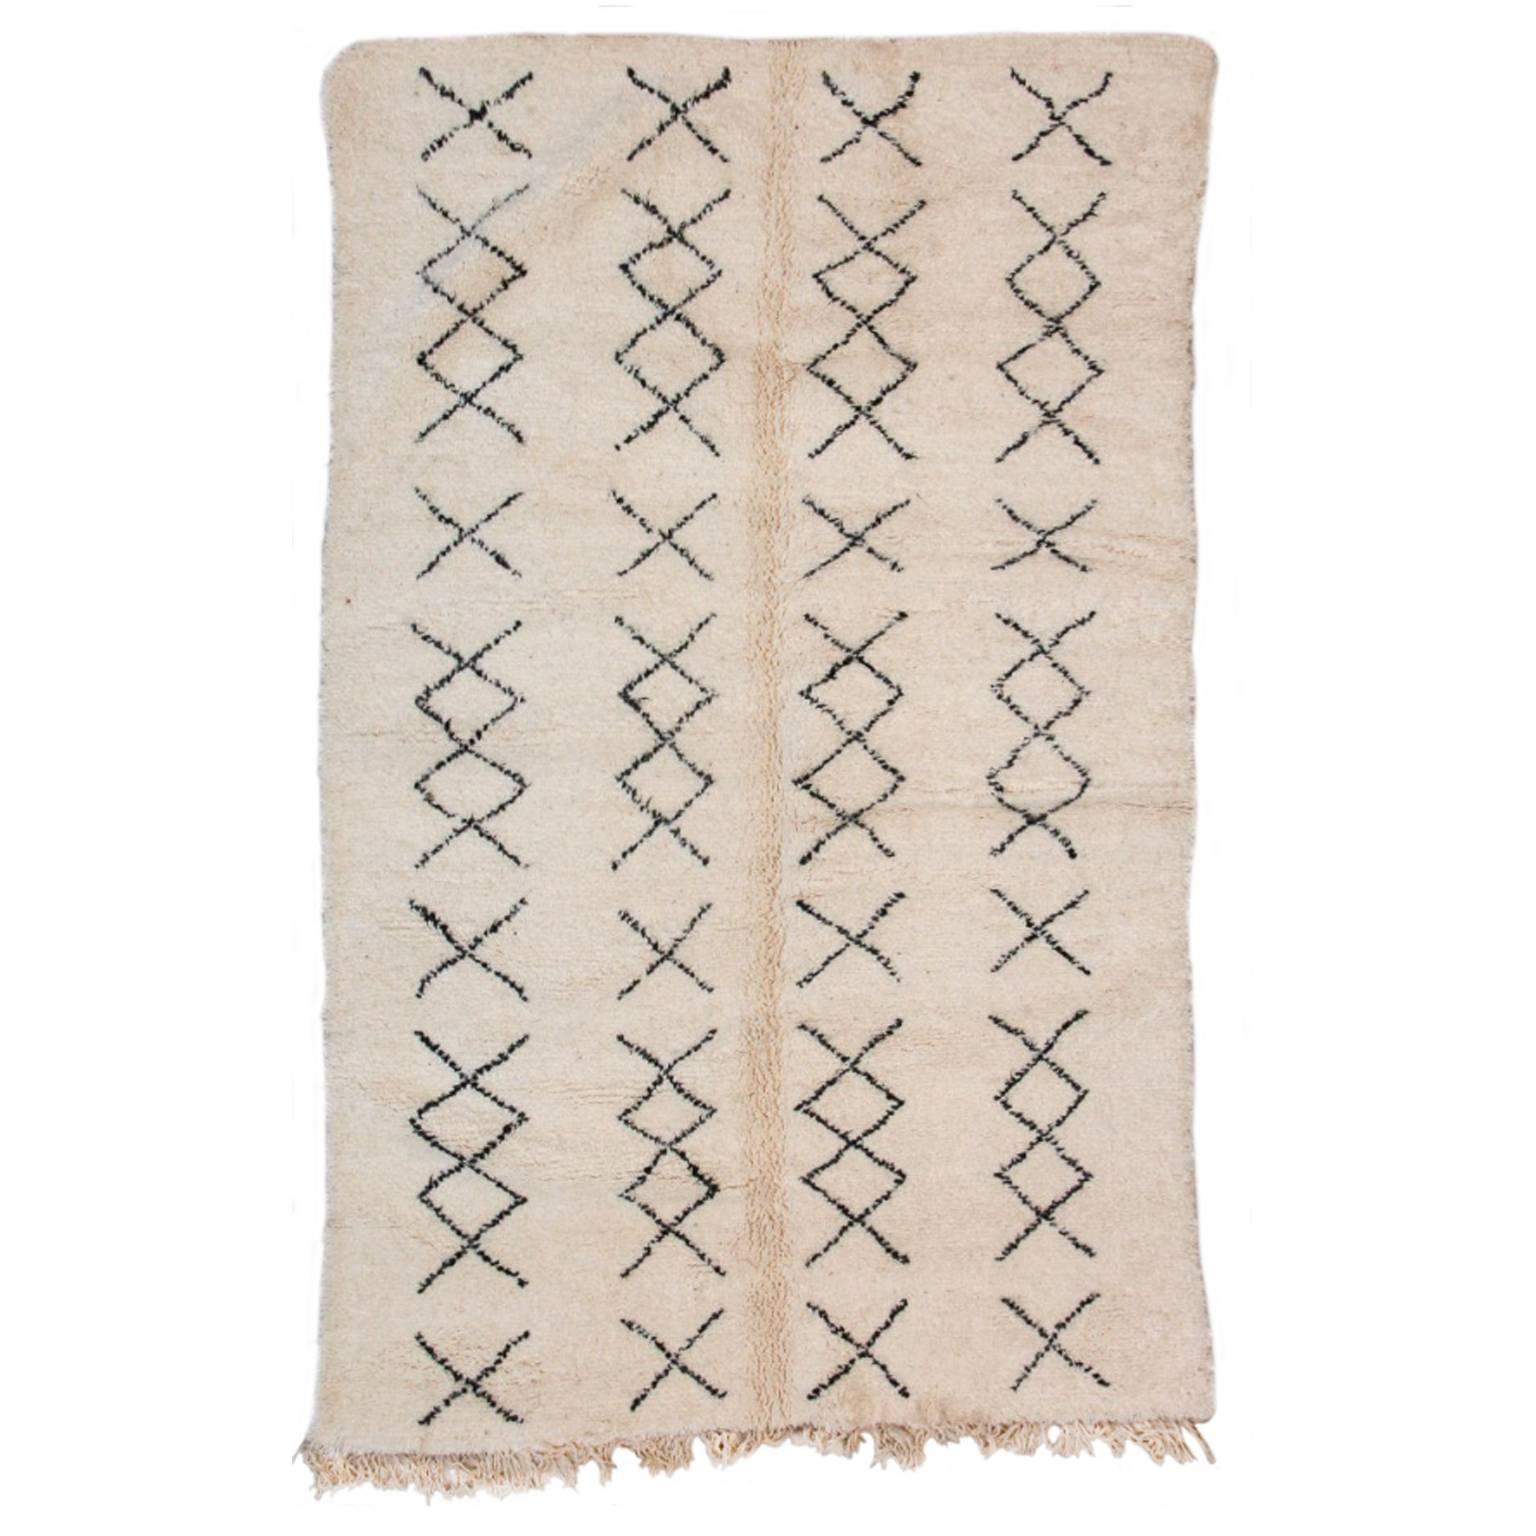 Beni Ourain Moroccan Rug with Four Column X-Pattern